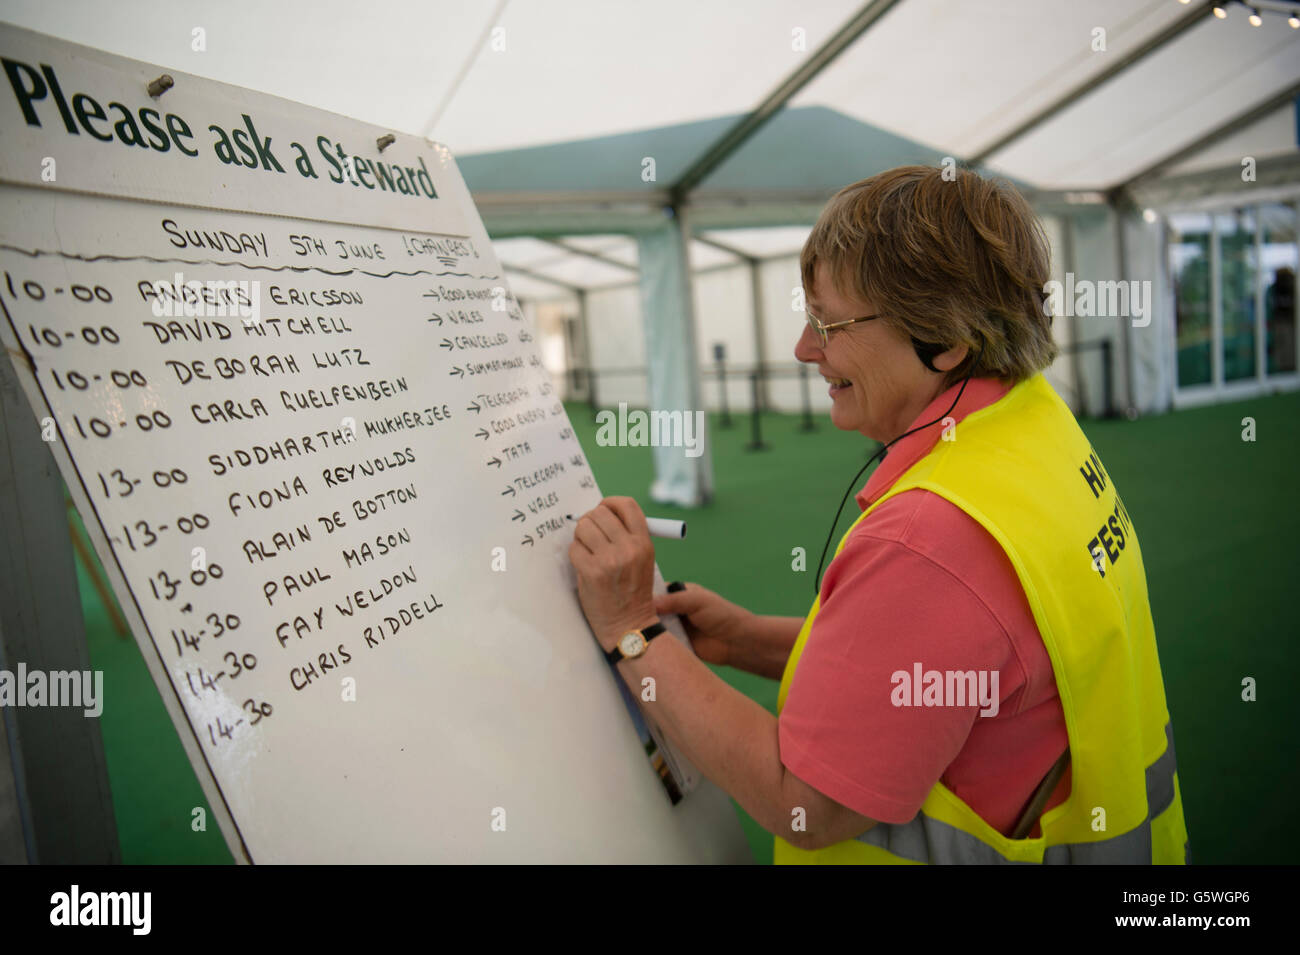 A woman volunteer writing out changes to the events timetable at The Hay Festival of Literature and the Arts, Hay on Wye, Powys, Wales UK, Sunday June 05 2016 Stock Photo